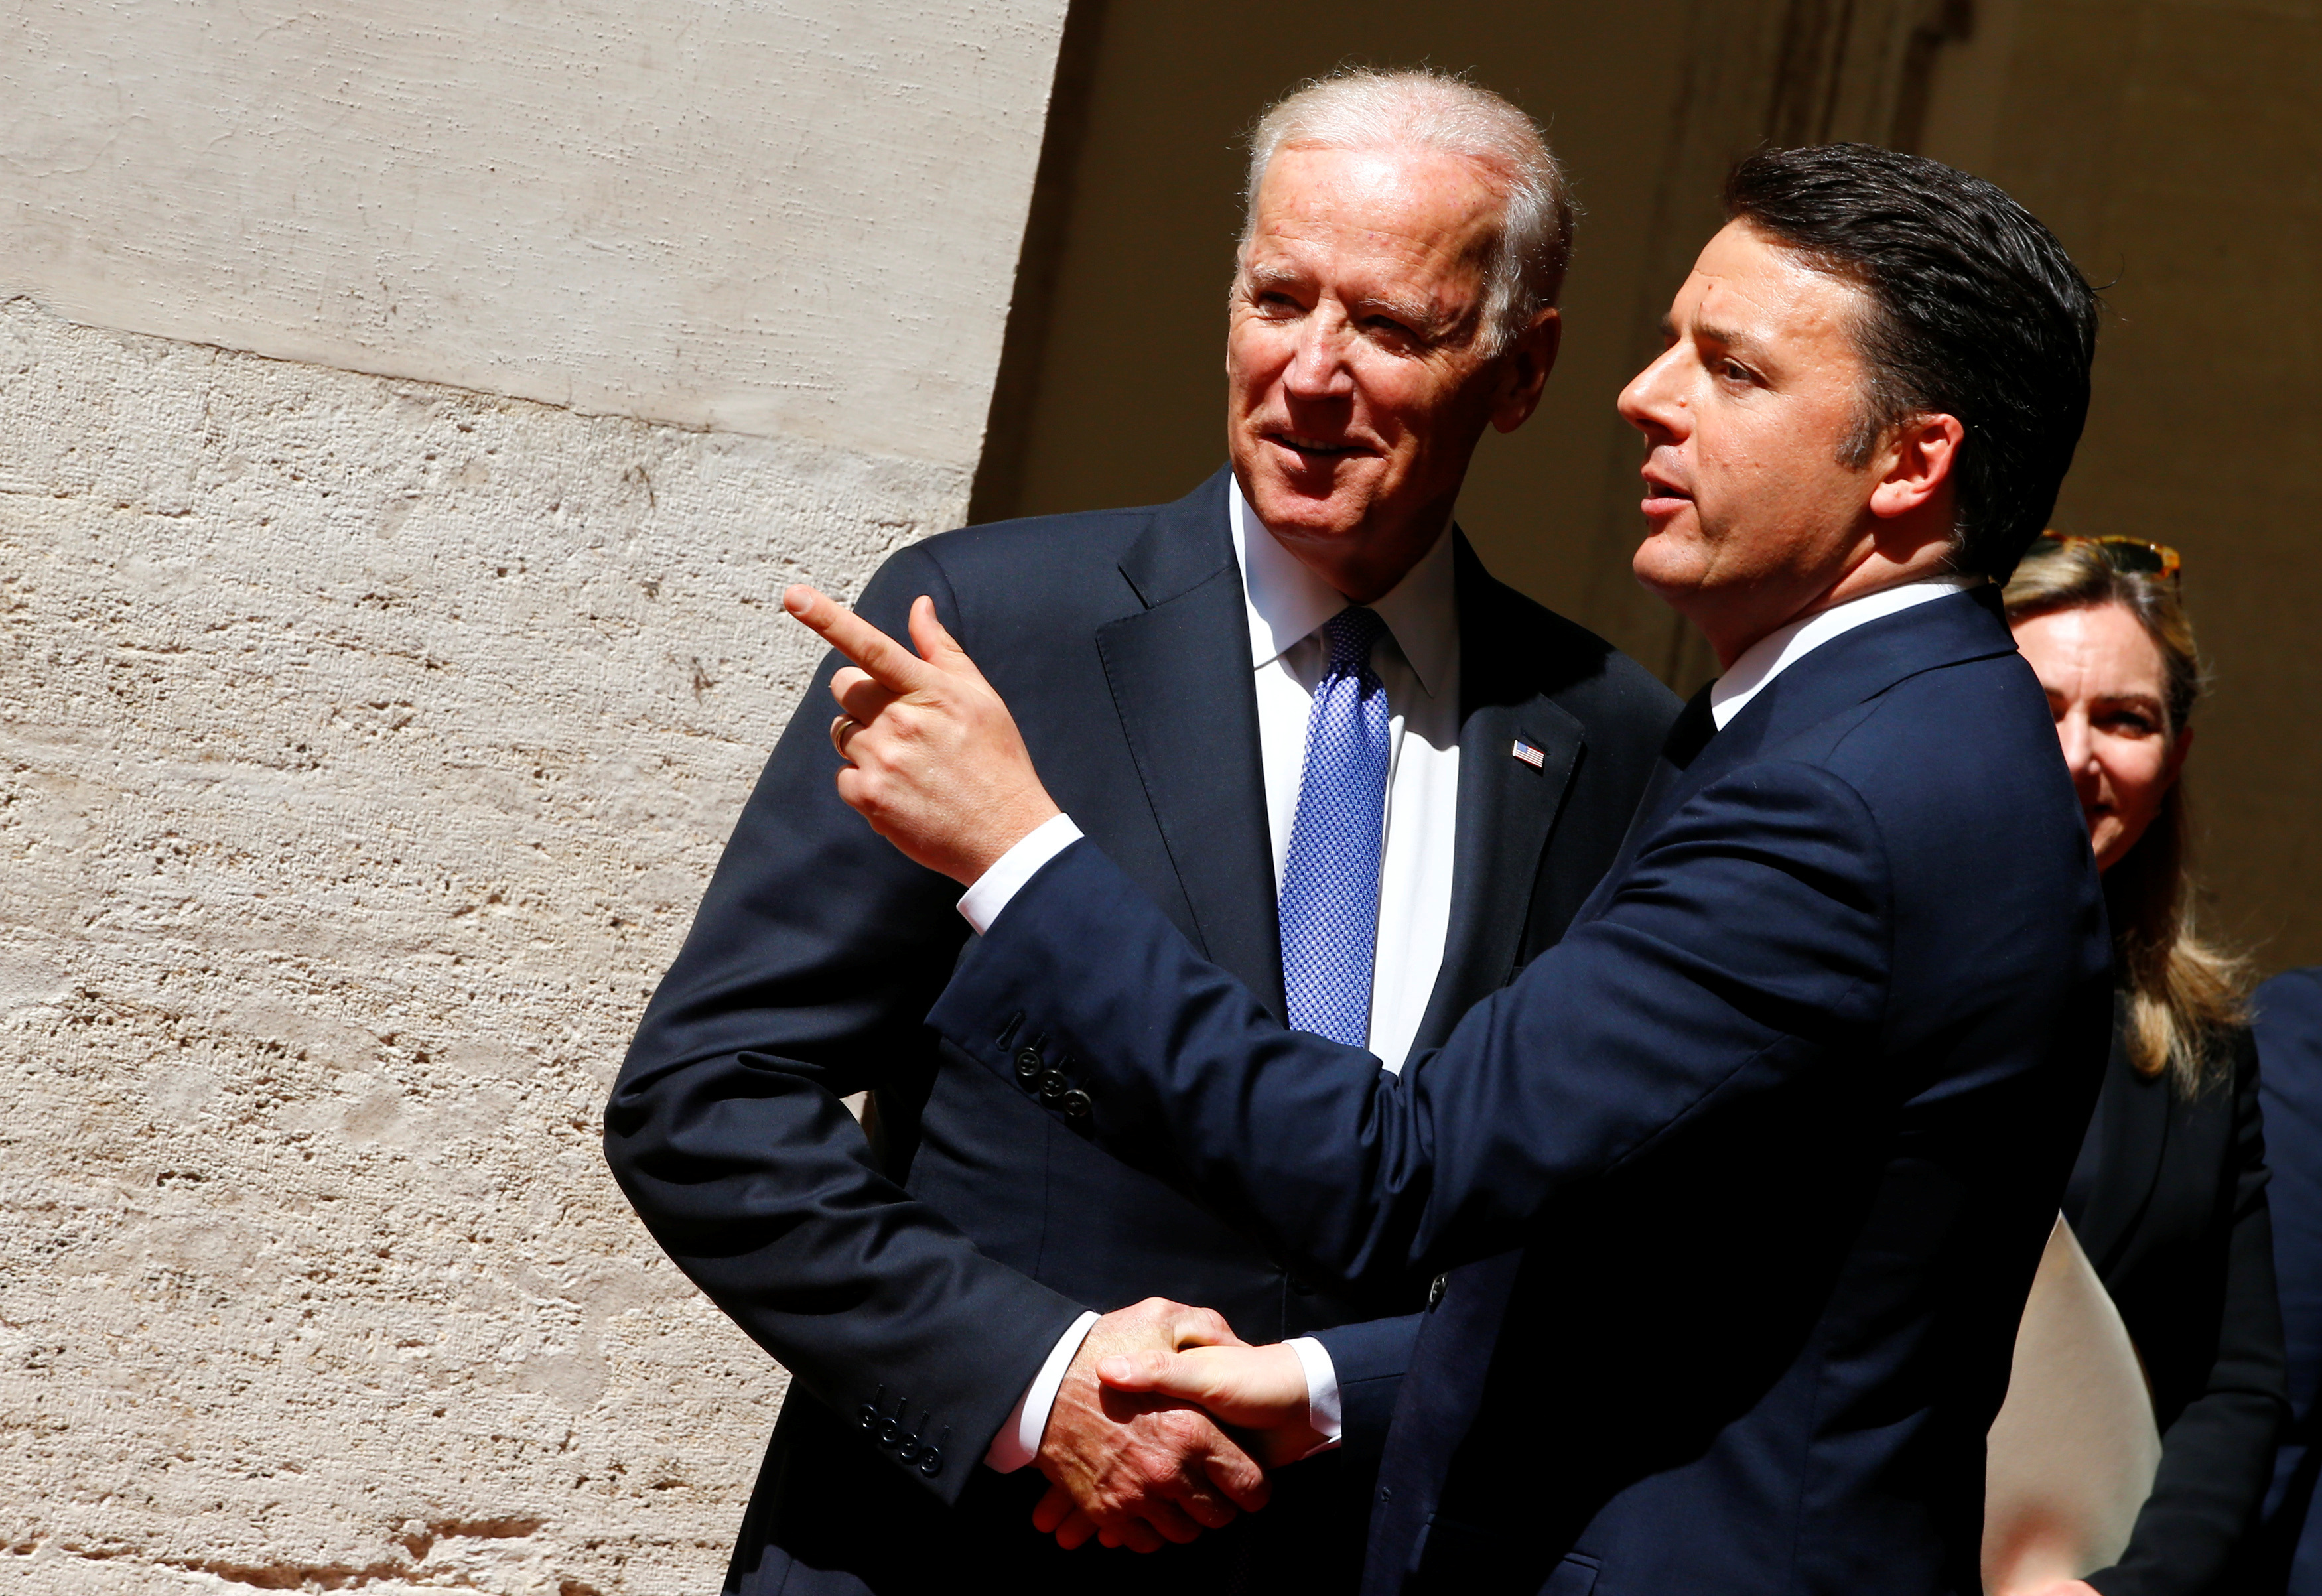 U.S. Vice President Biden talks with Italy Prime Minister Renzi during a meeting at Chigi Palace in Rome